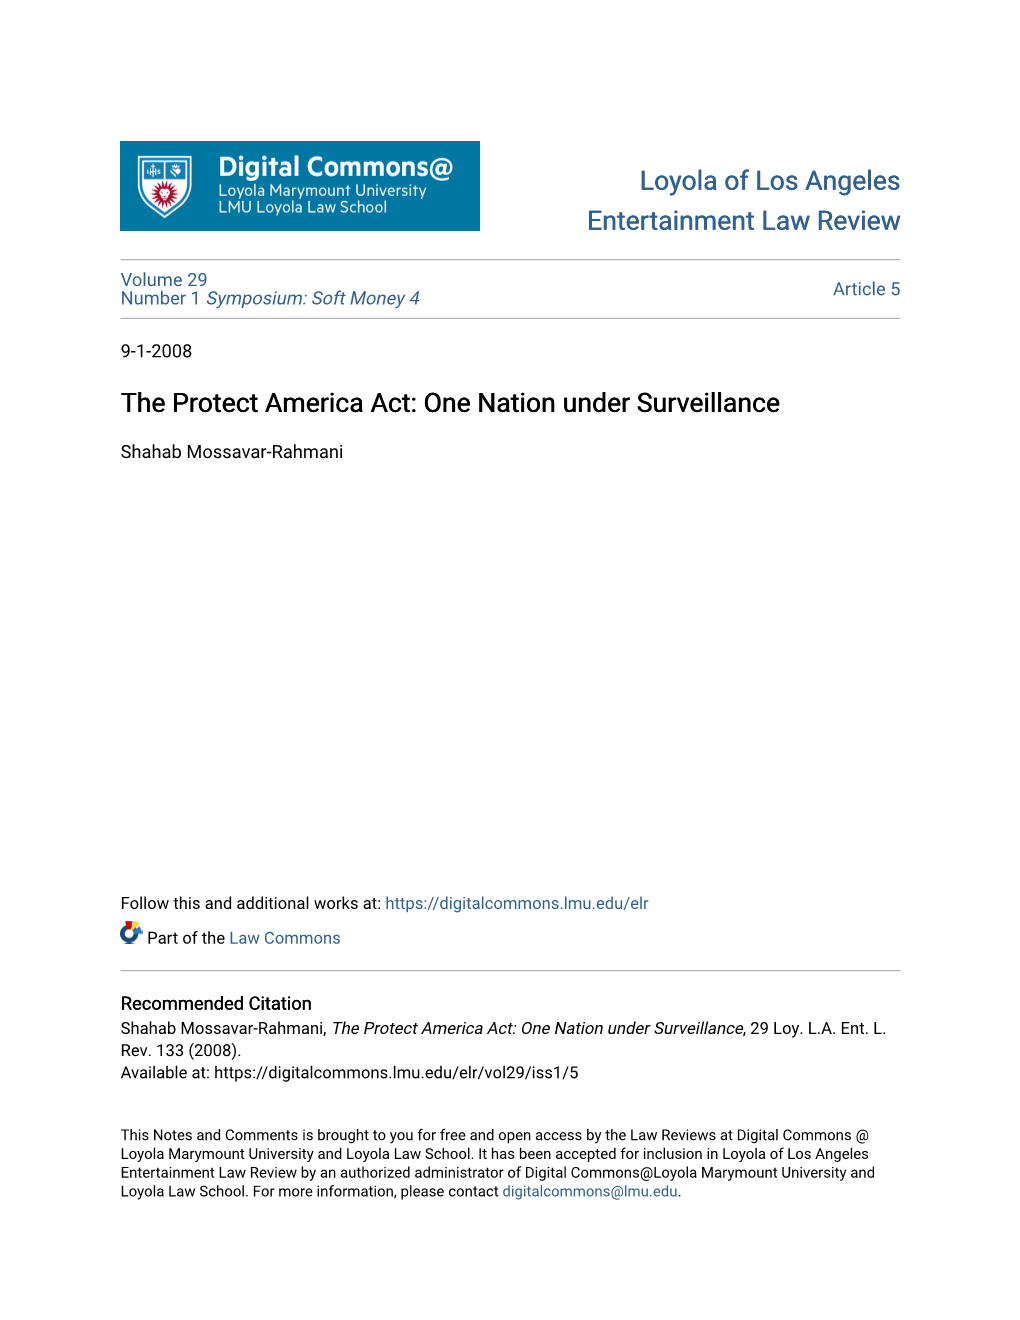 The Protect America Act: One Nation Under Surveillance